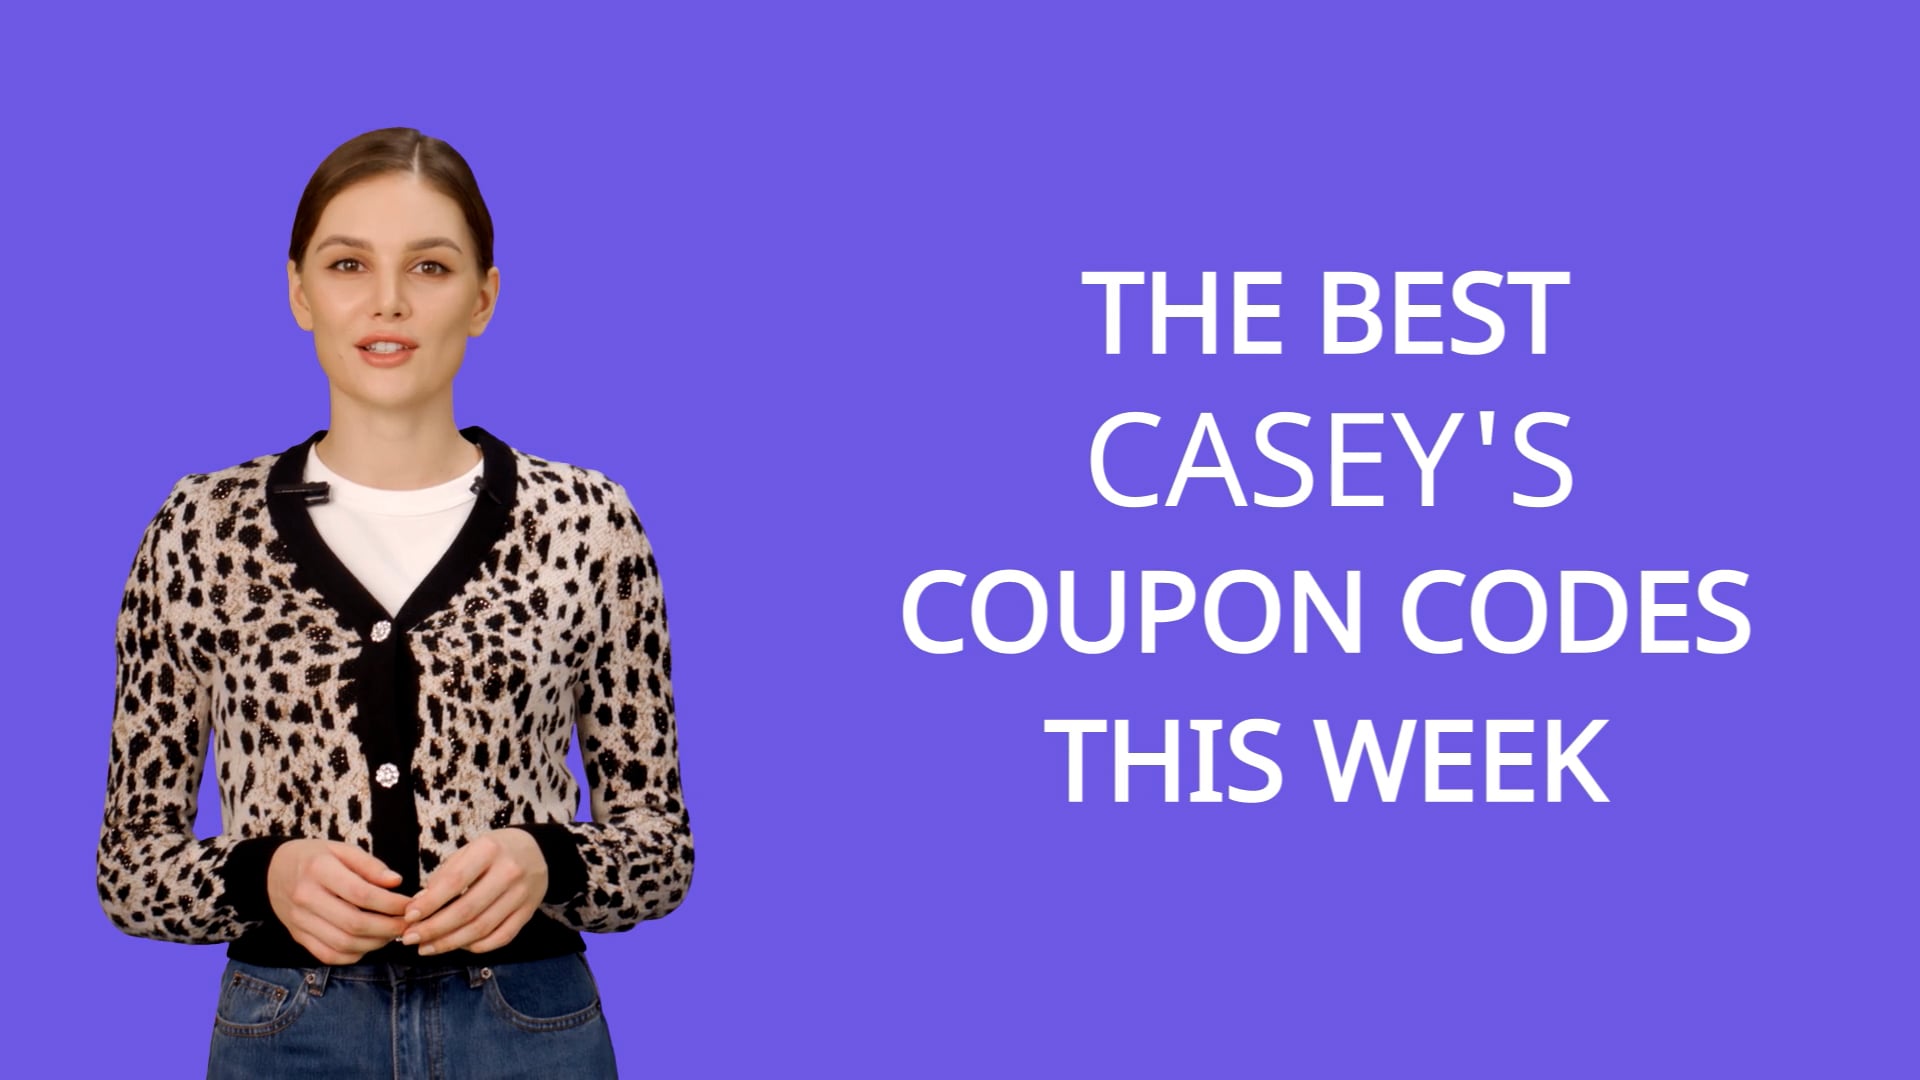 The best Casey's coupon codes this week Tuesday, May 23rd, 2023 on Vimeo